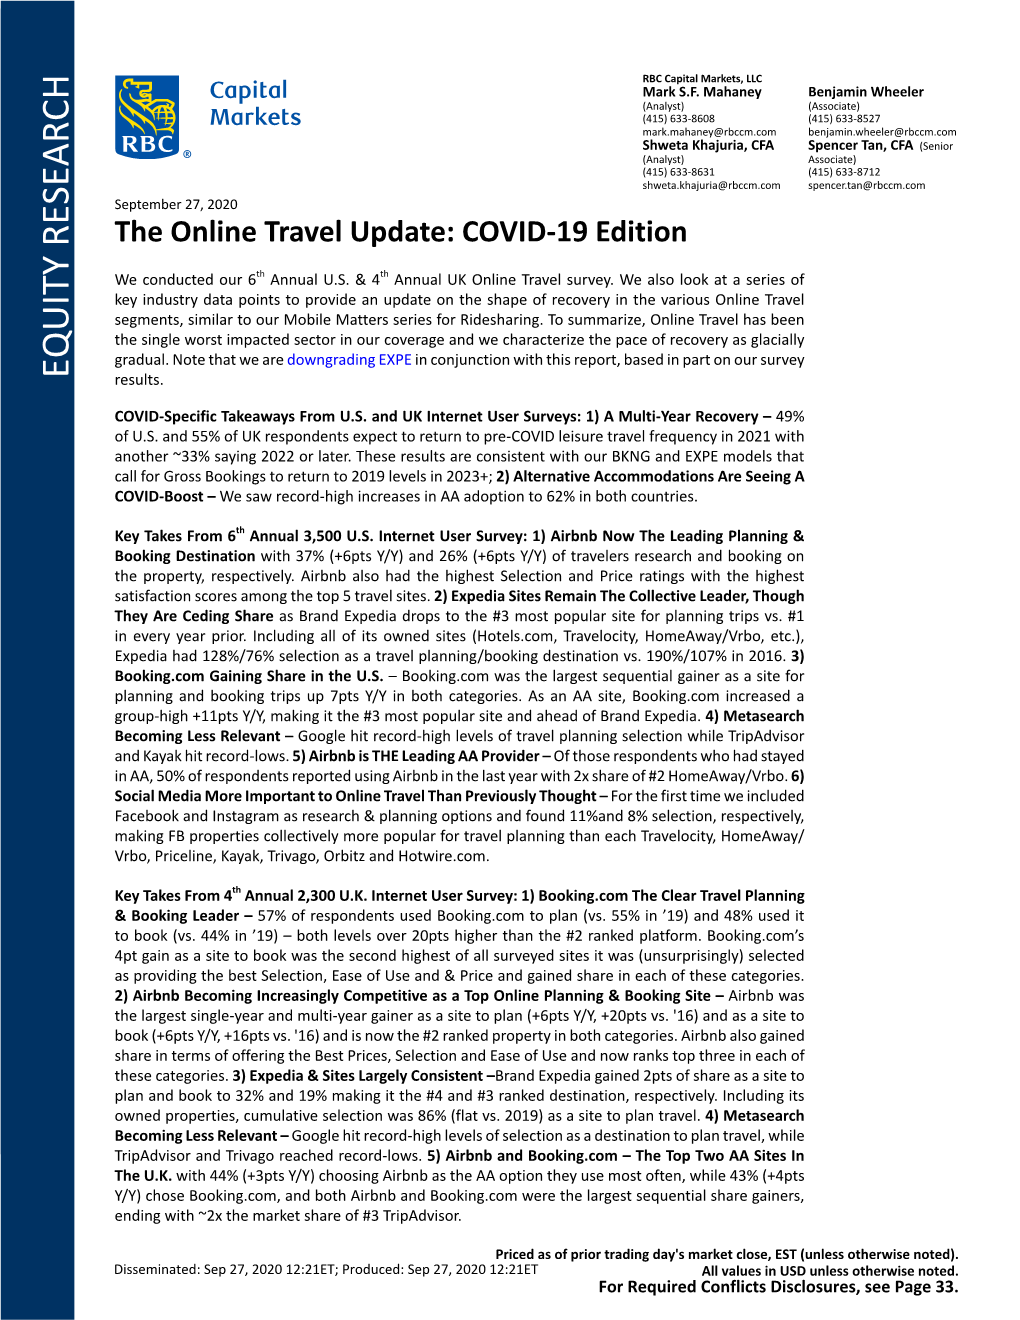 The Online Travel Update: COVID-19 Edition